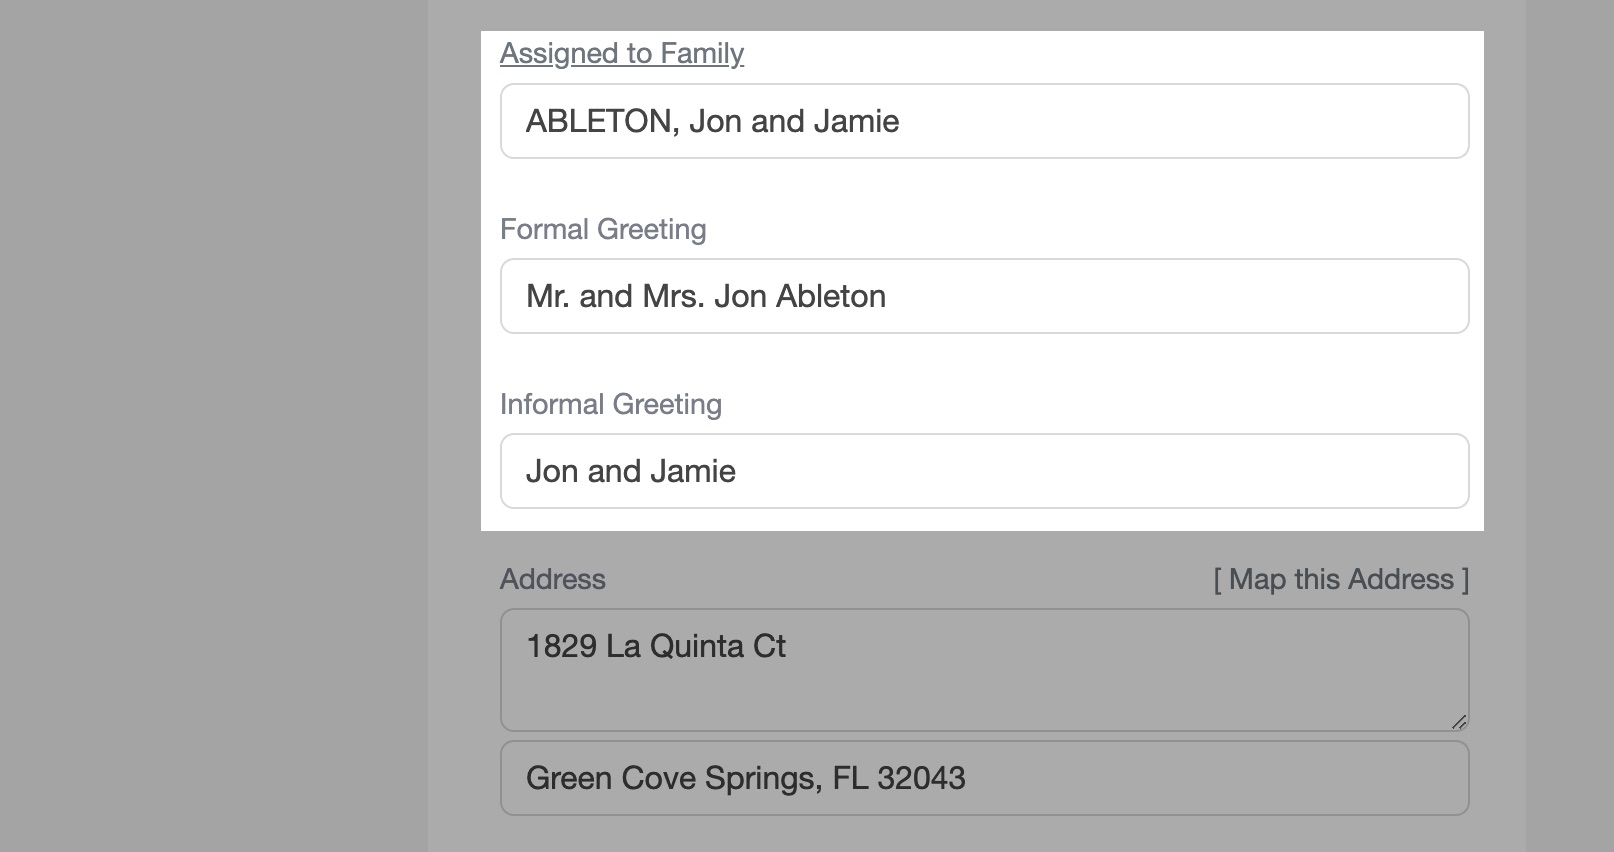 Change Family Assignment button